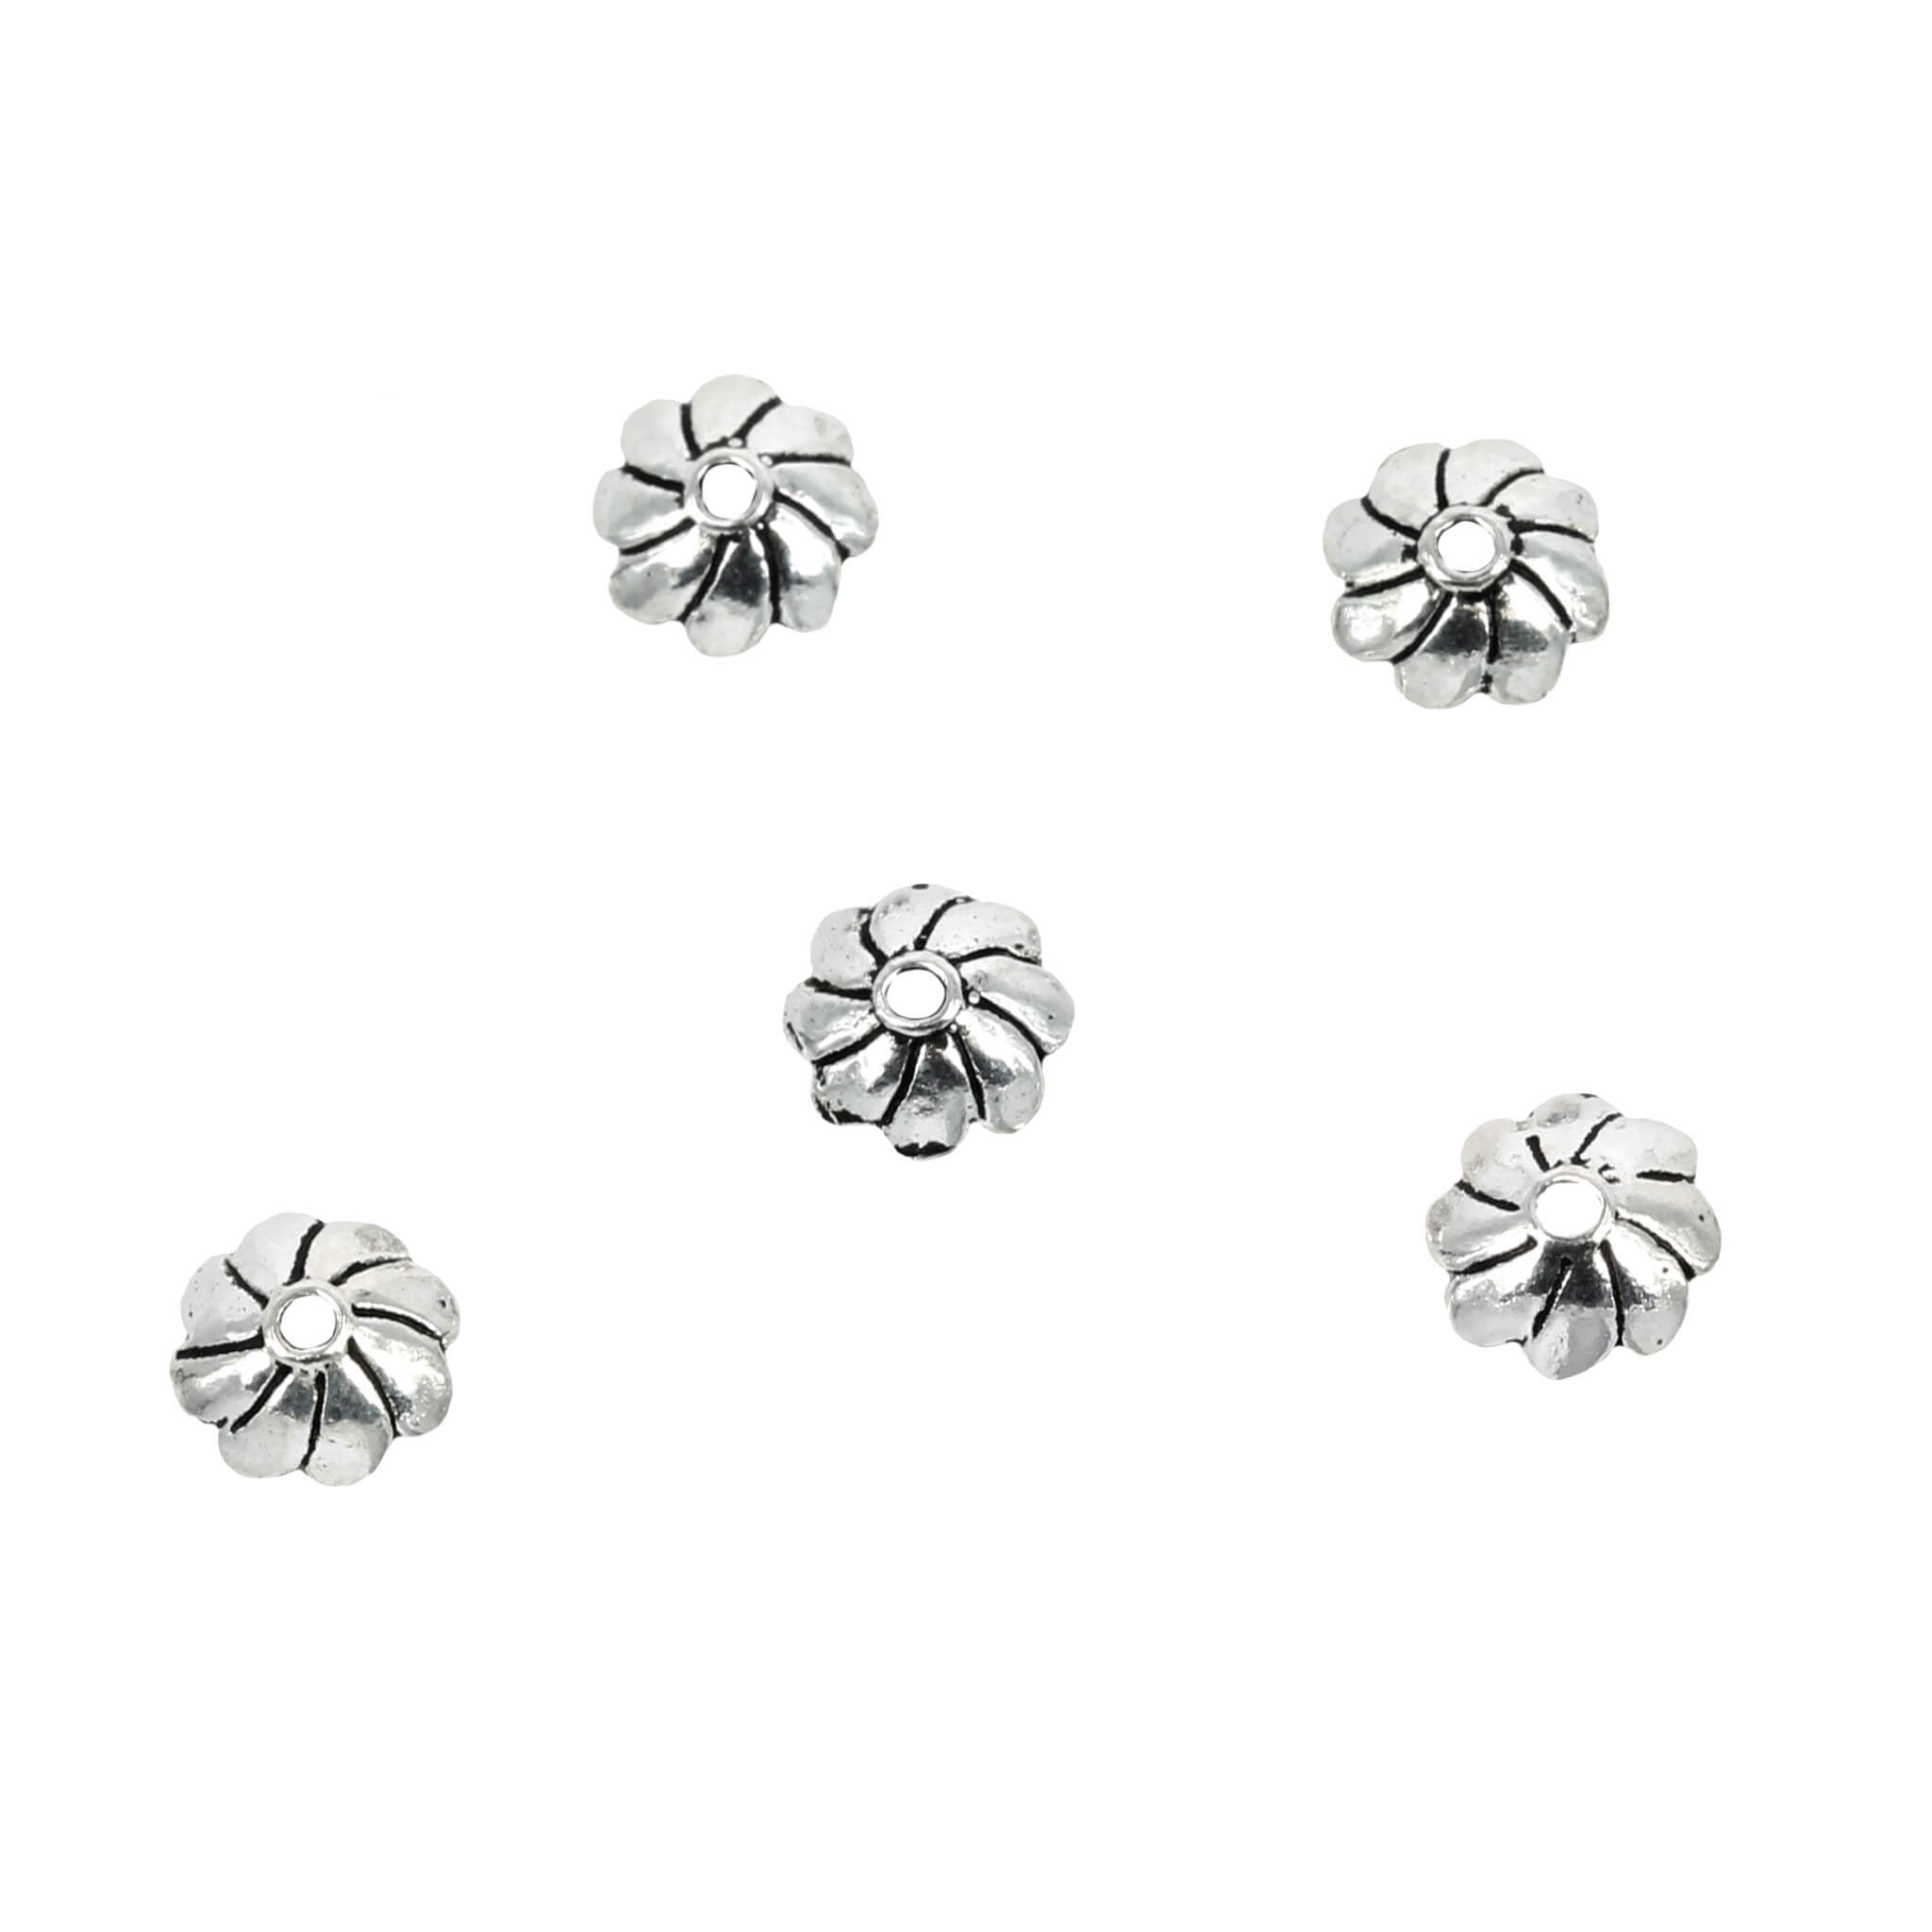 Radiating Scalloped Bead Cap in Sterling Silver 6mm